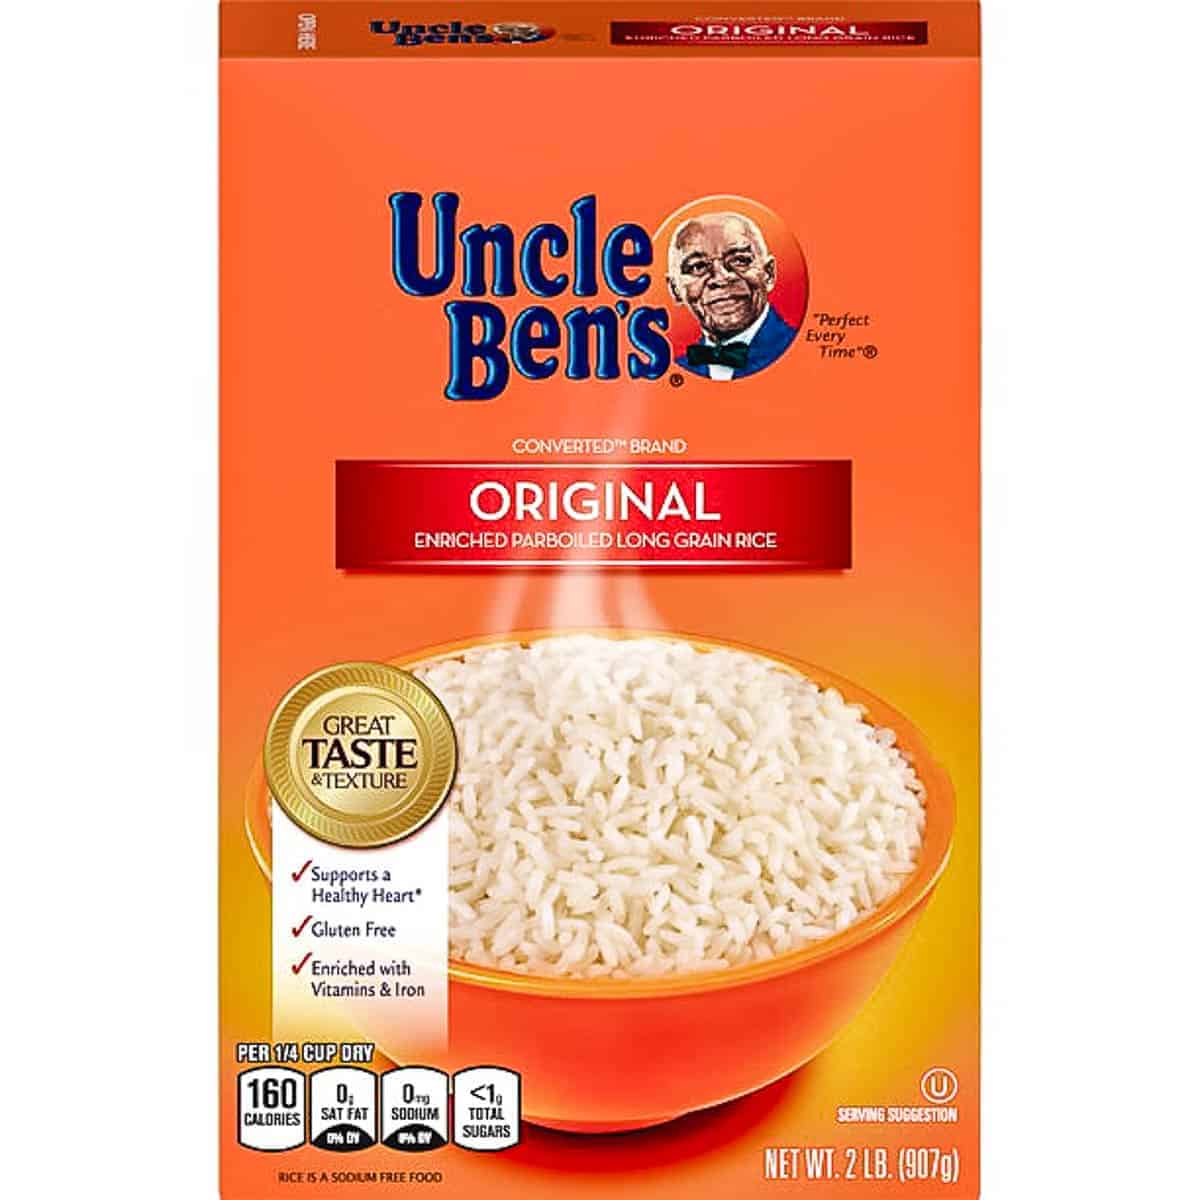 Box of Uncle Bens rice.